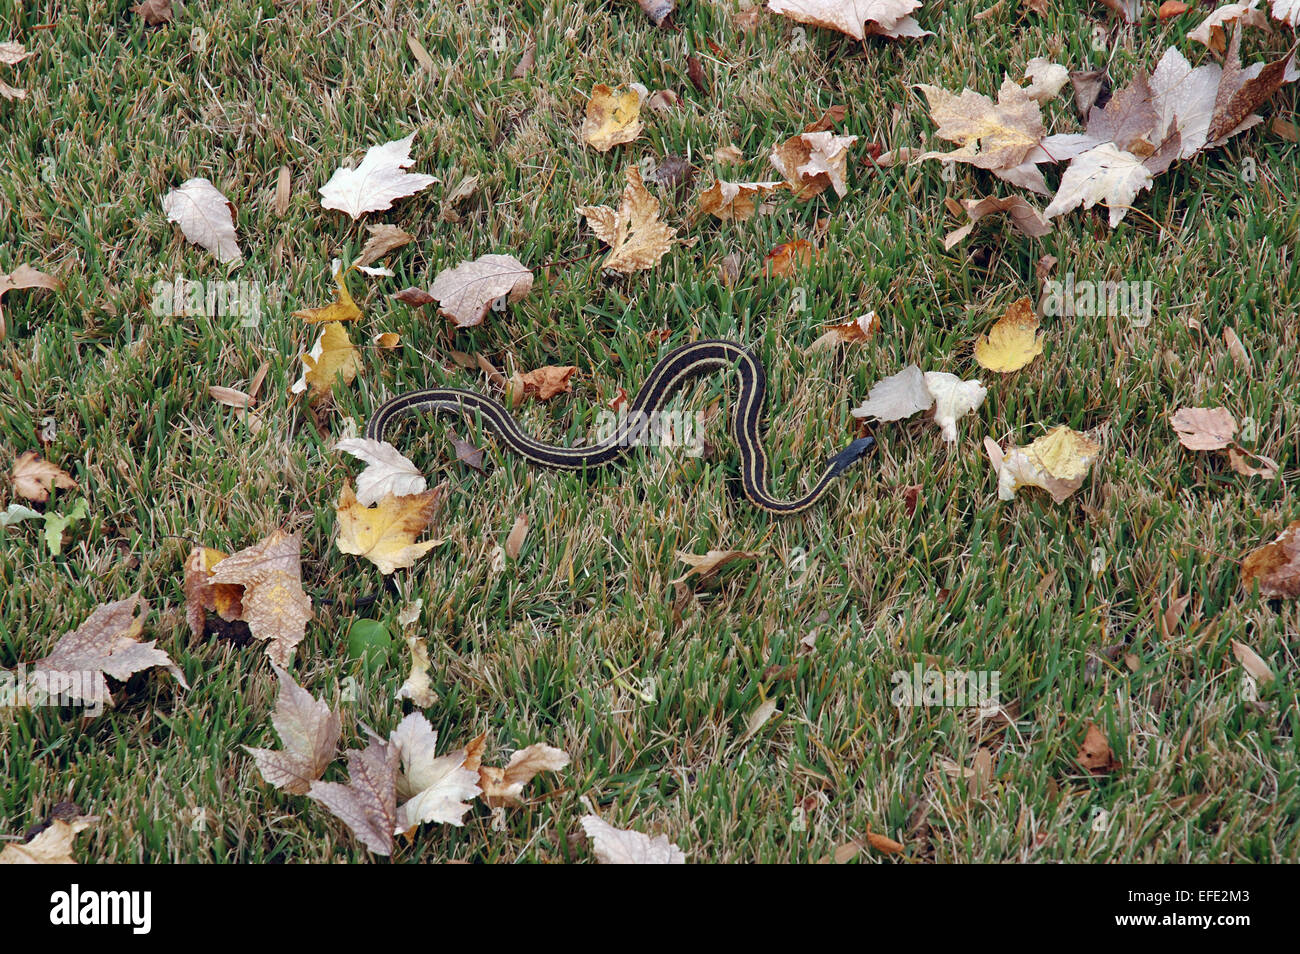 Garter snake in the grass, on a lawn.  The Garter snake is a Colubrid snake genus common across North America. Stock Photo